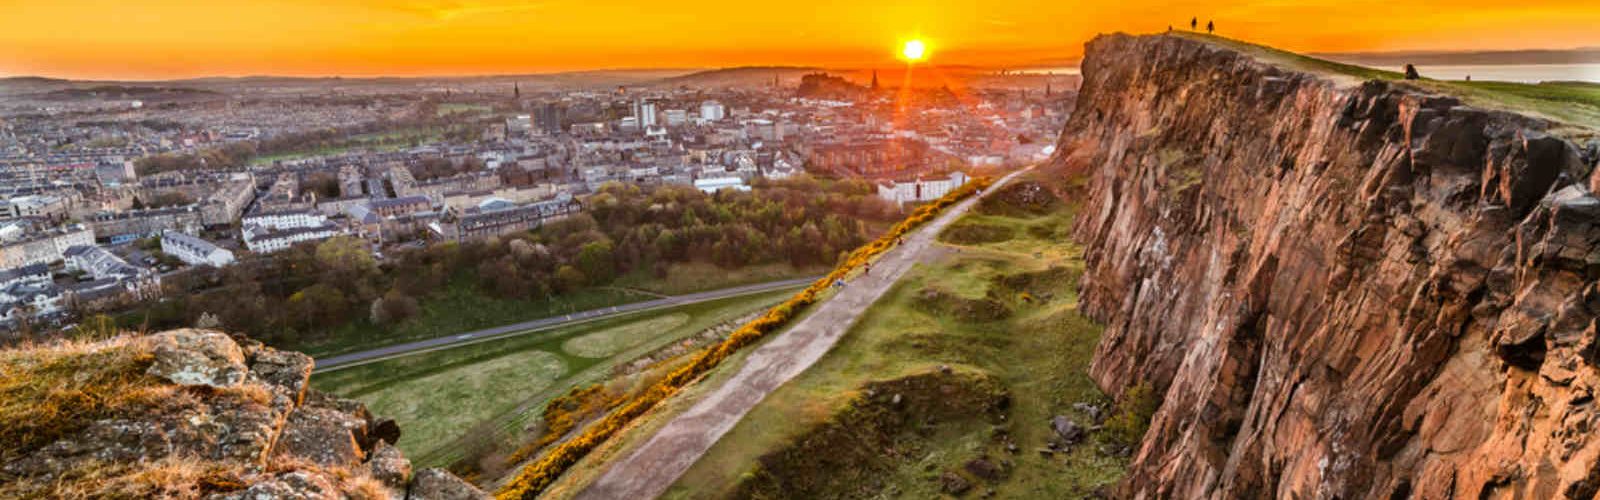 View from Arthur's Seat in Edinburgh as the sun sets